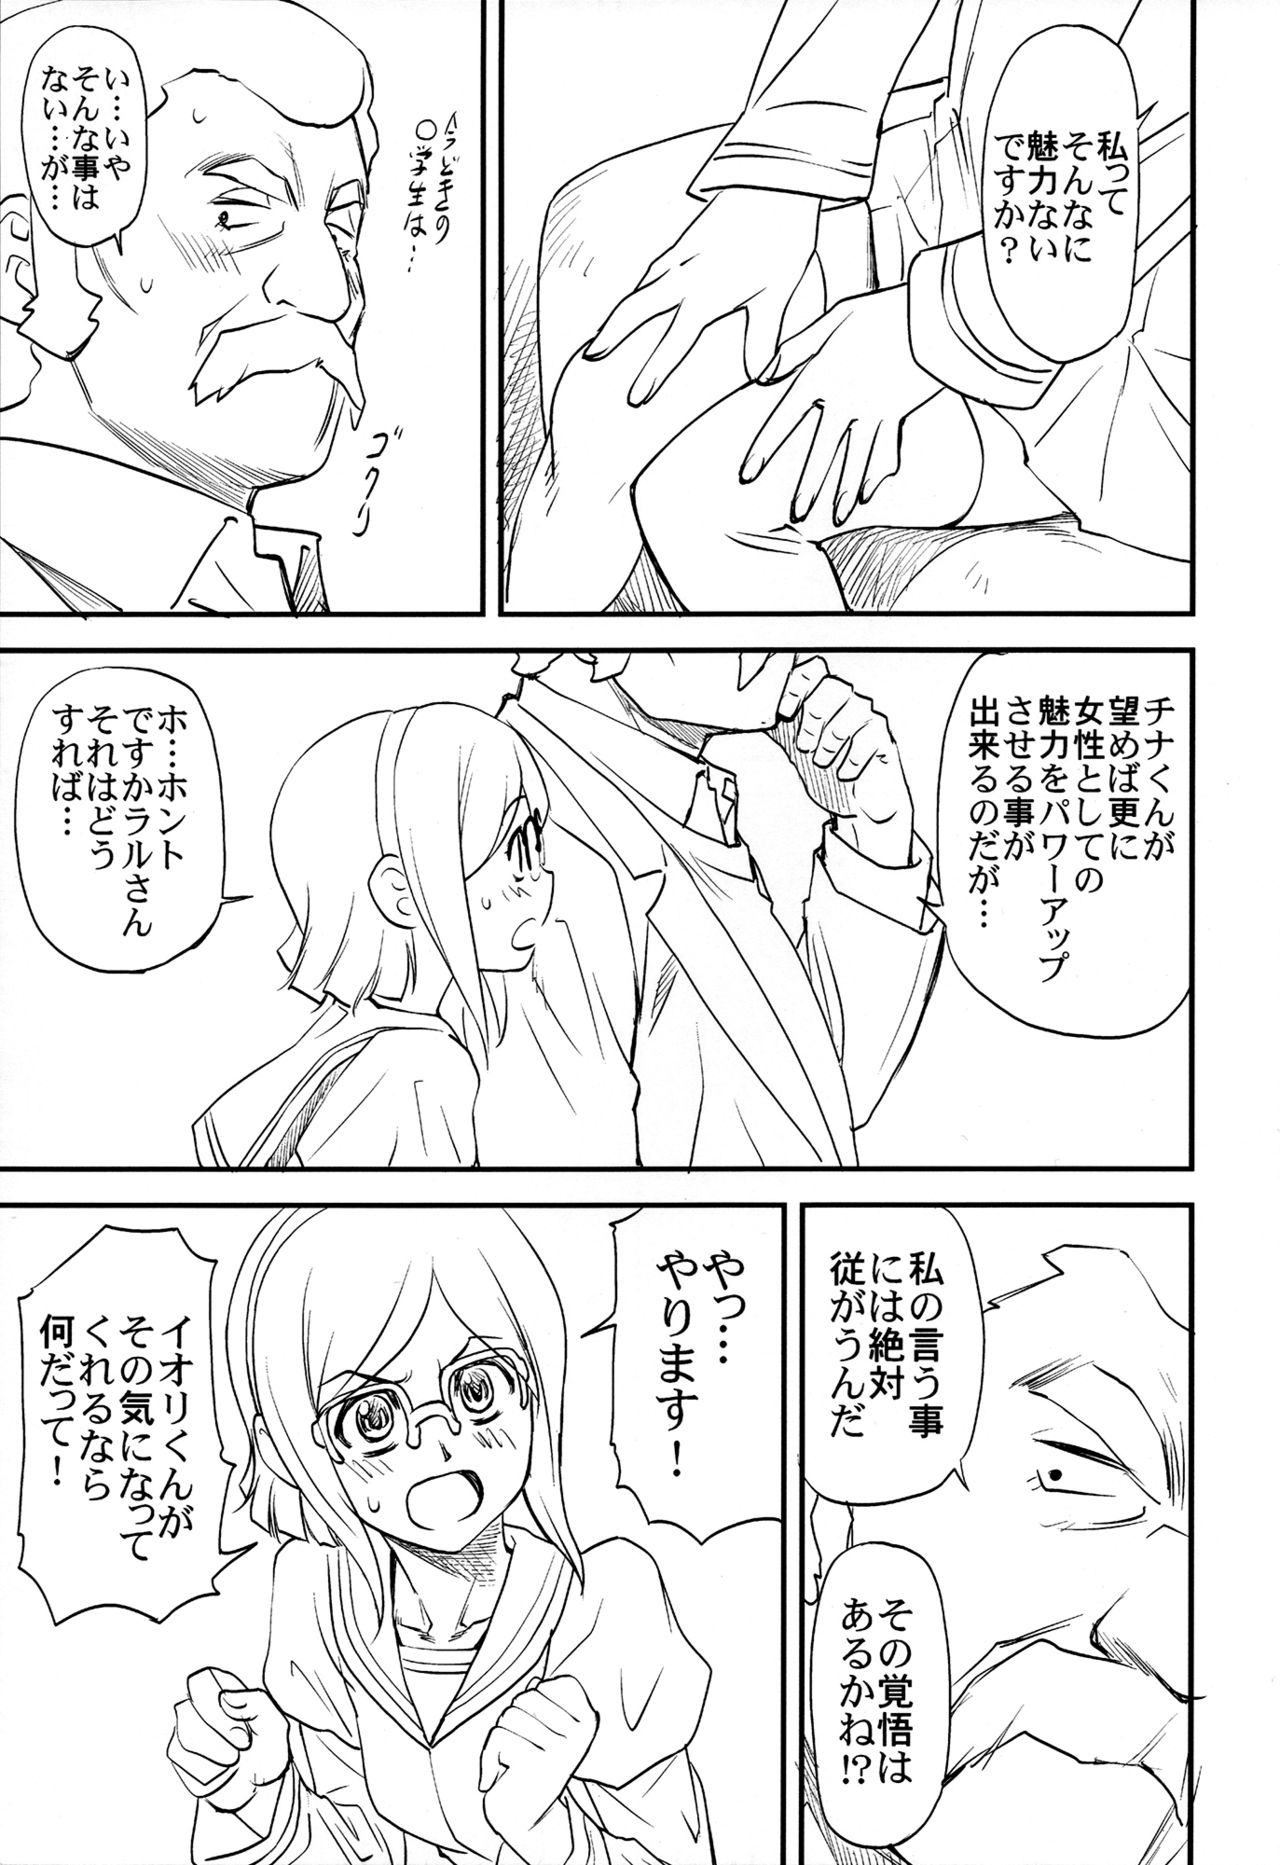 (C86) [Leaf Party (Byakurou, Nagare Ippon)] Ral no Emono (Gundam Build Fighters) page 6 full